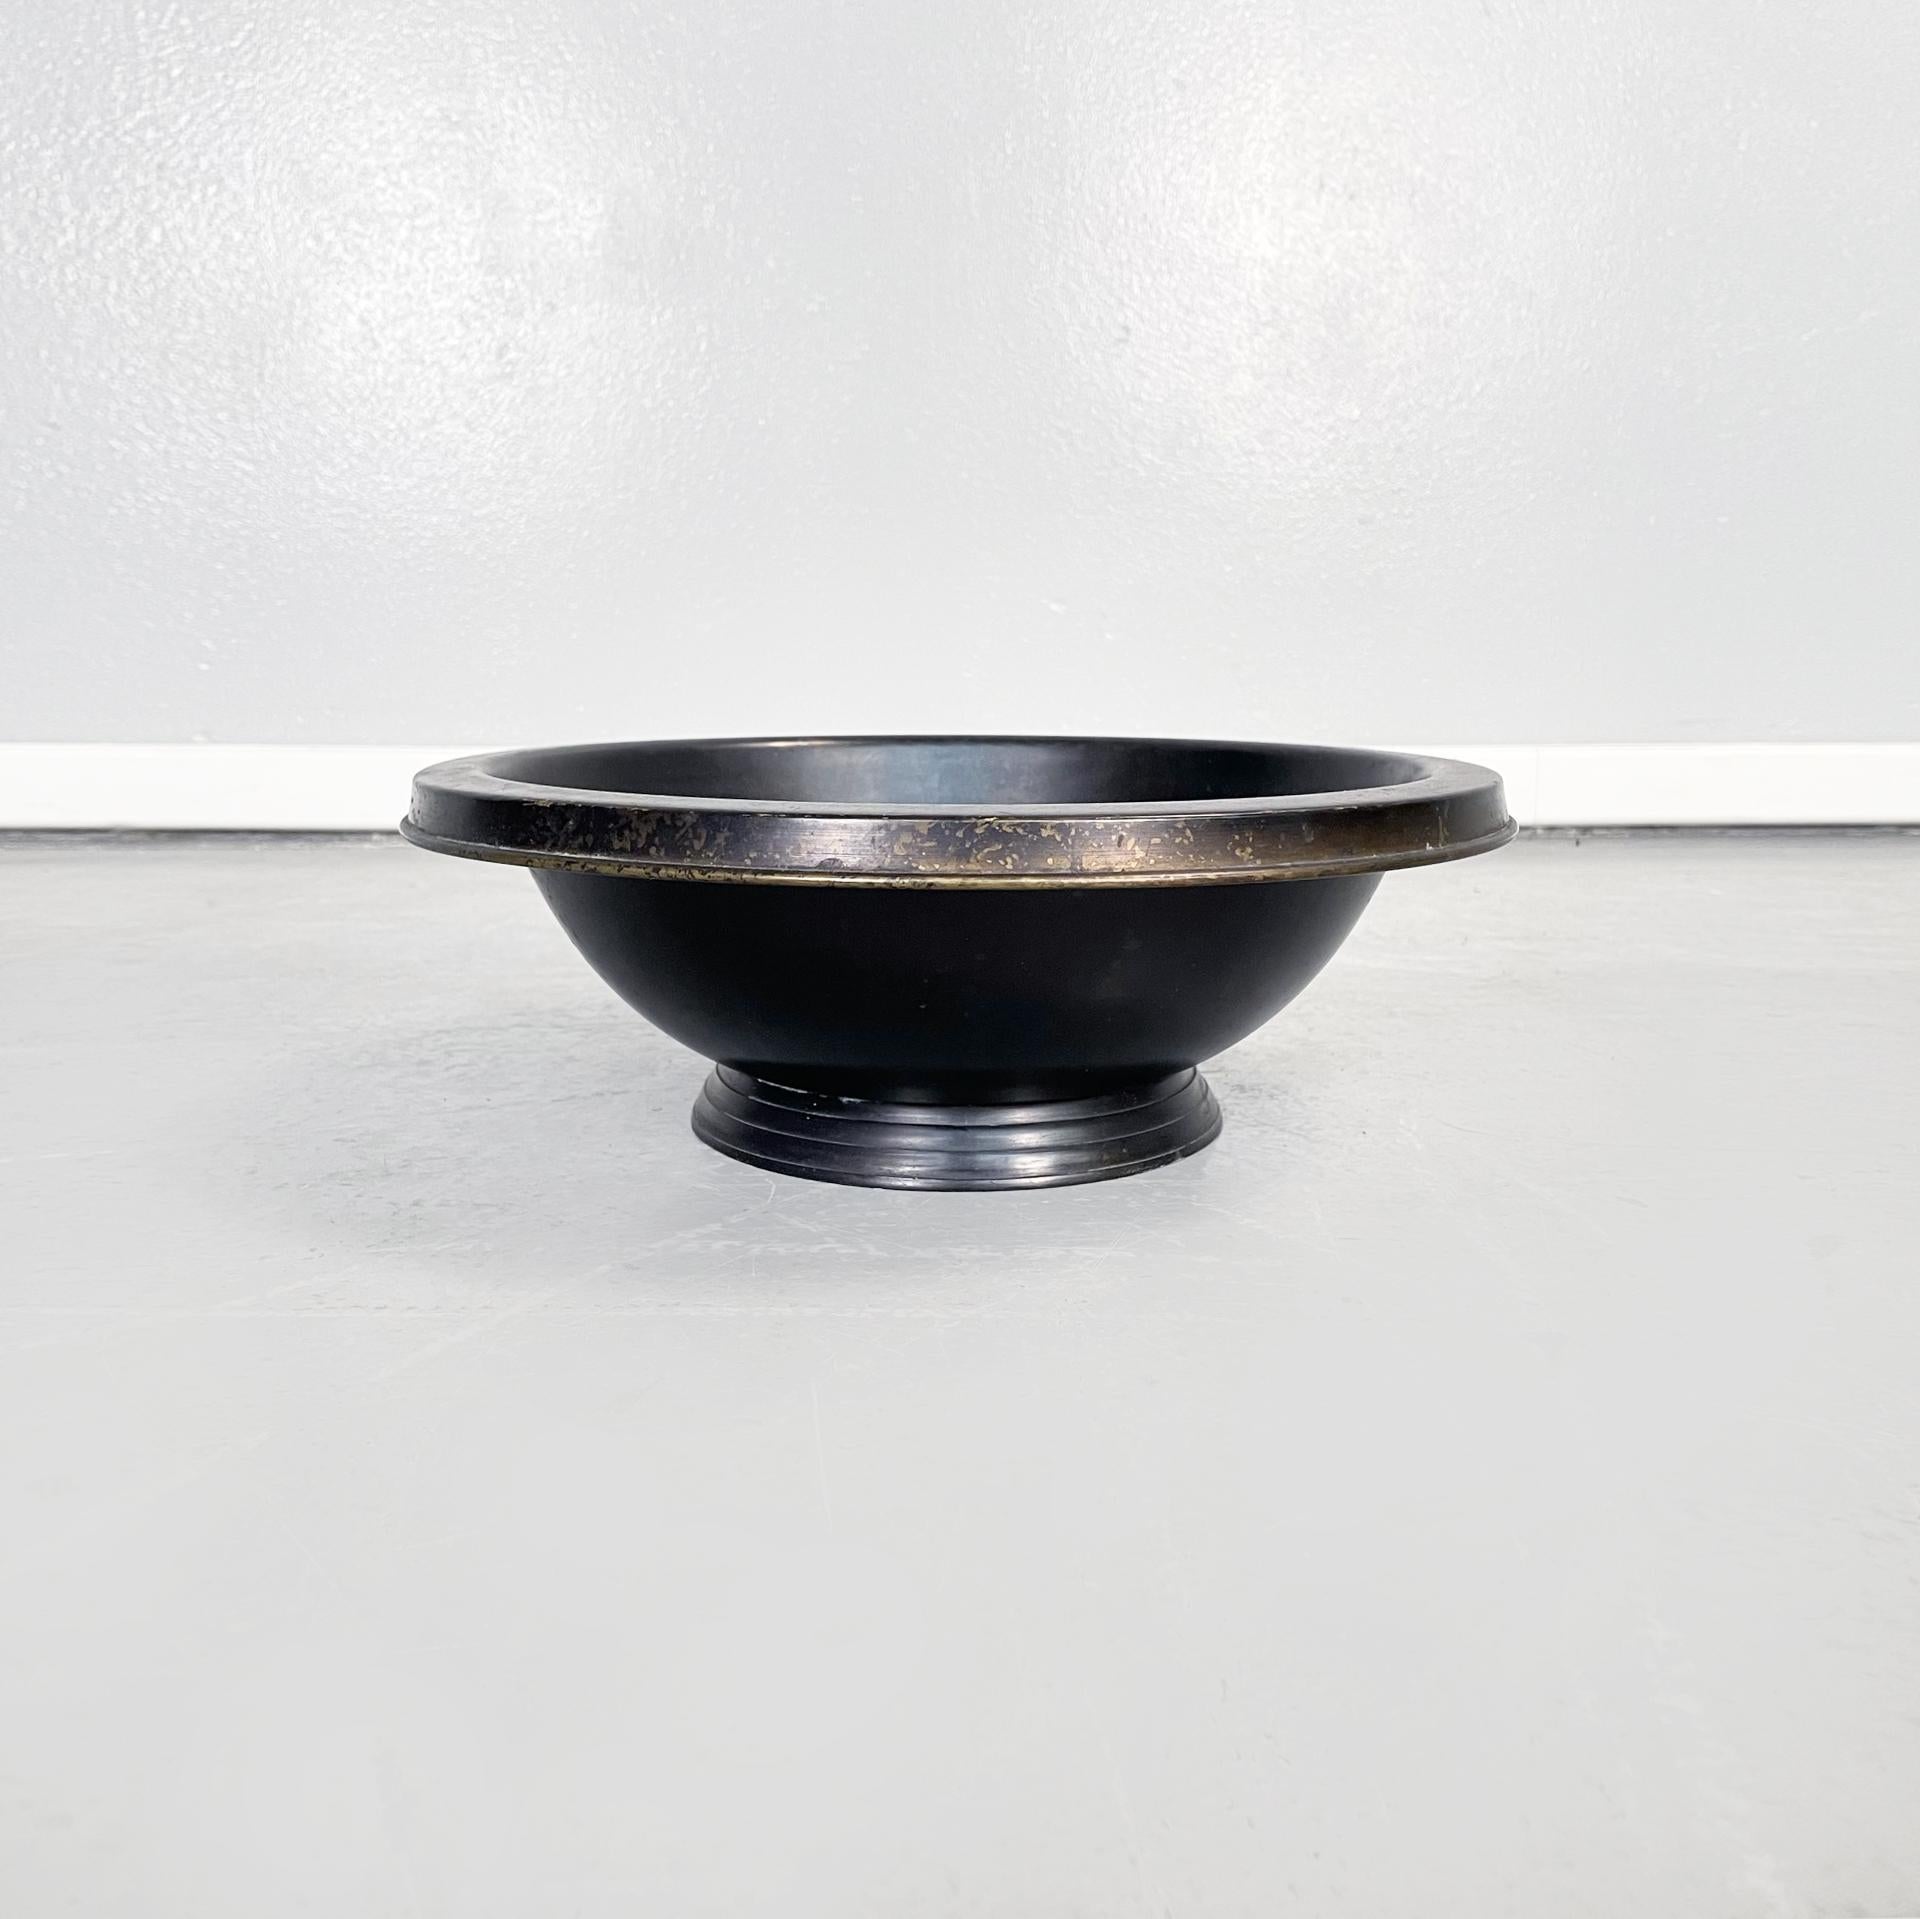 Italian modern Round bowl centerpiece in black painted metal, 1990s
Vintage round bowl in black painted metal. The central part consists of a hemisphere with a protruding profile, resting on the round base. Suitable as a centerpiece, to be used